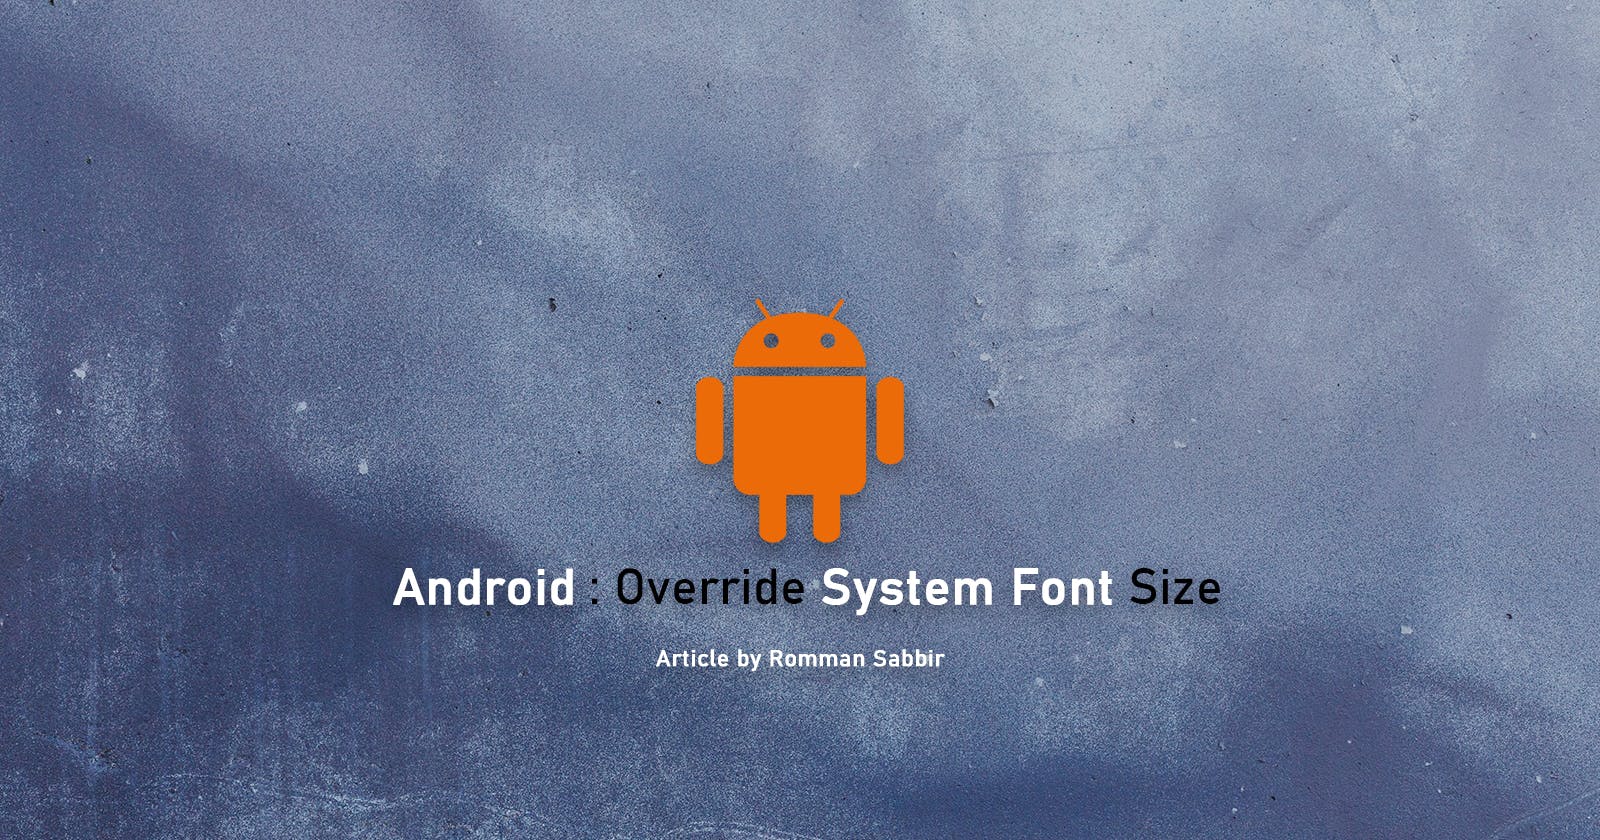 Android : Override System Font Size